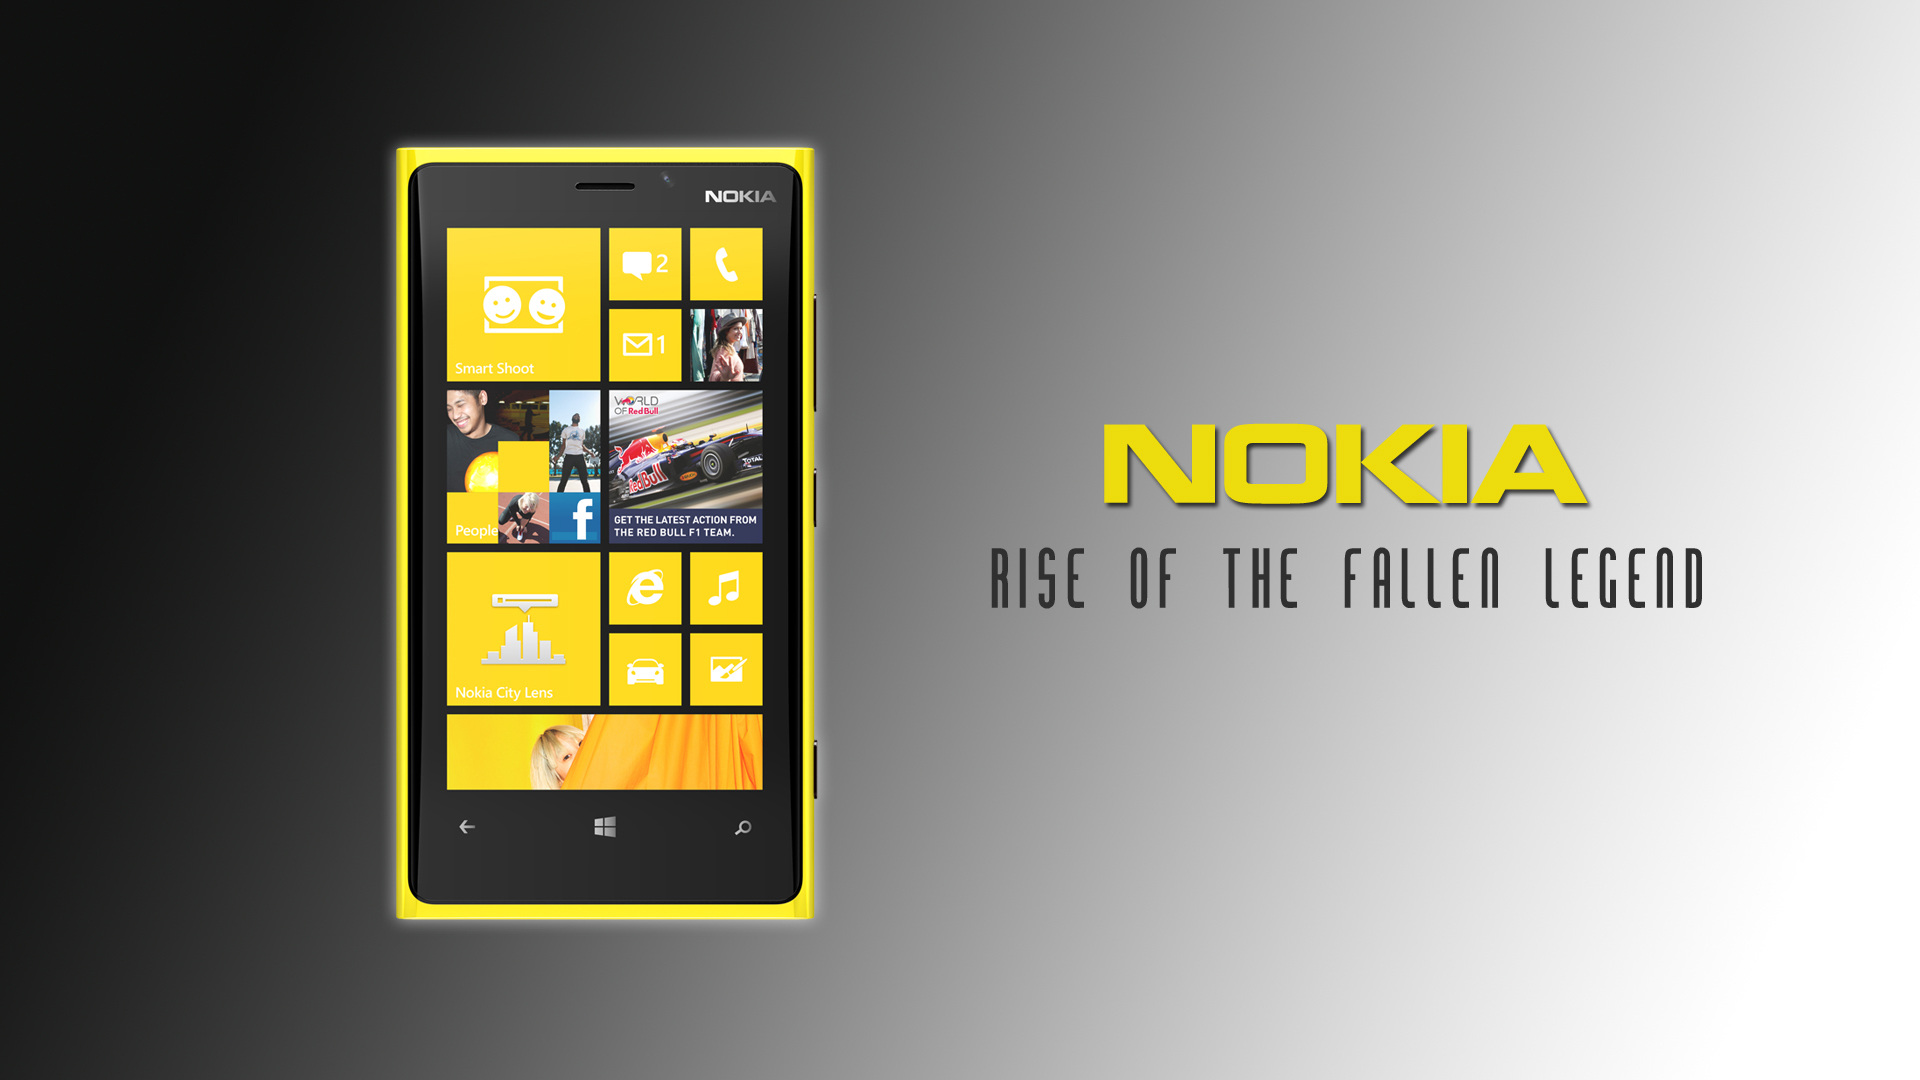 Nokia Lumia 920 On A Gray Background Wallpapers And Images